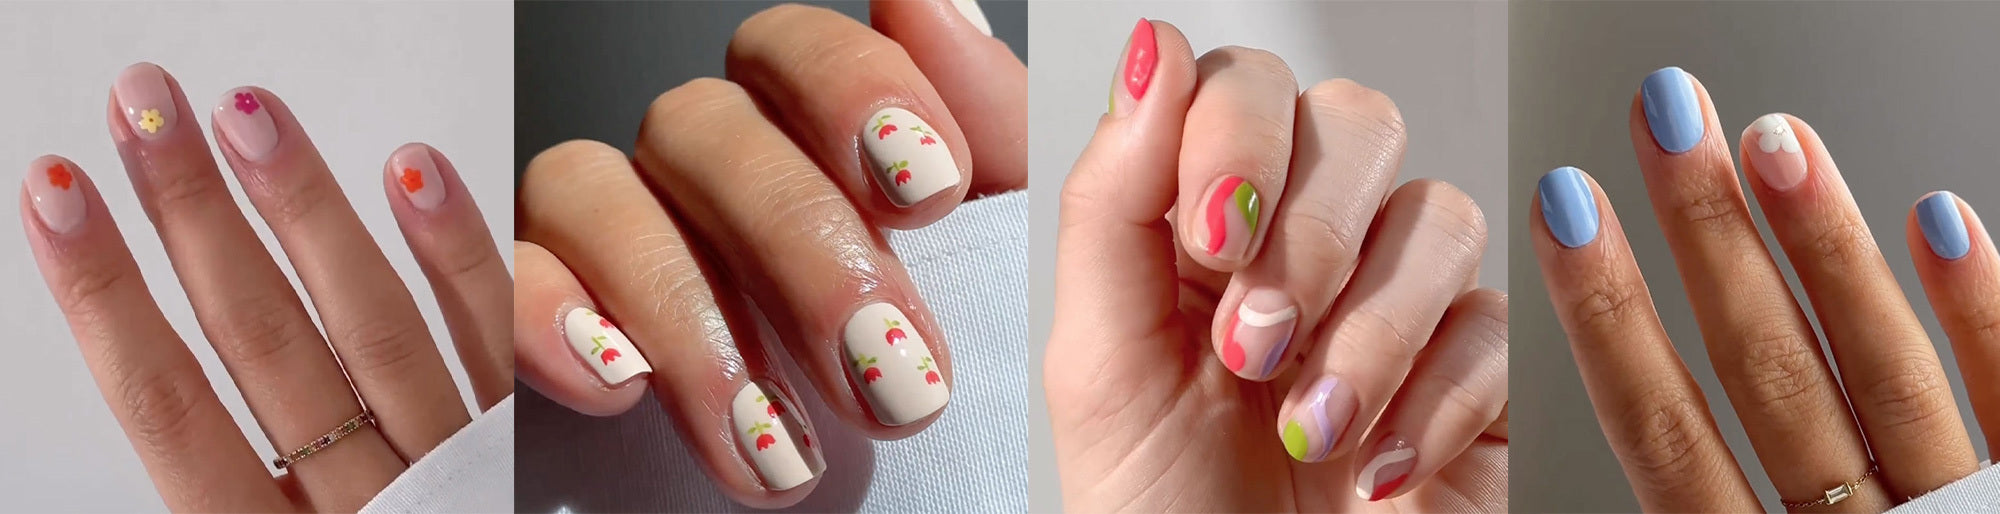 I will show you how to use a nail dotting tool in 4 creative ways